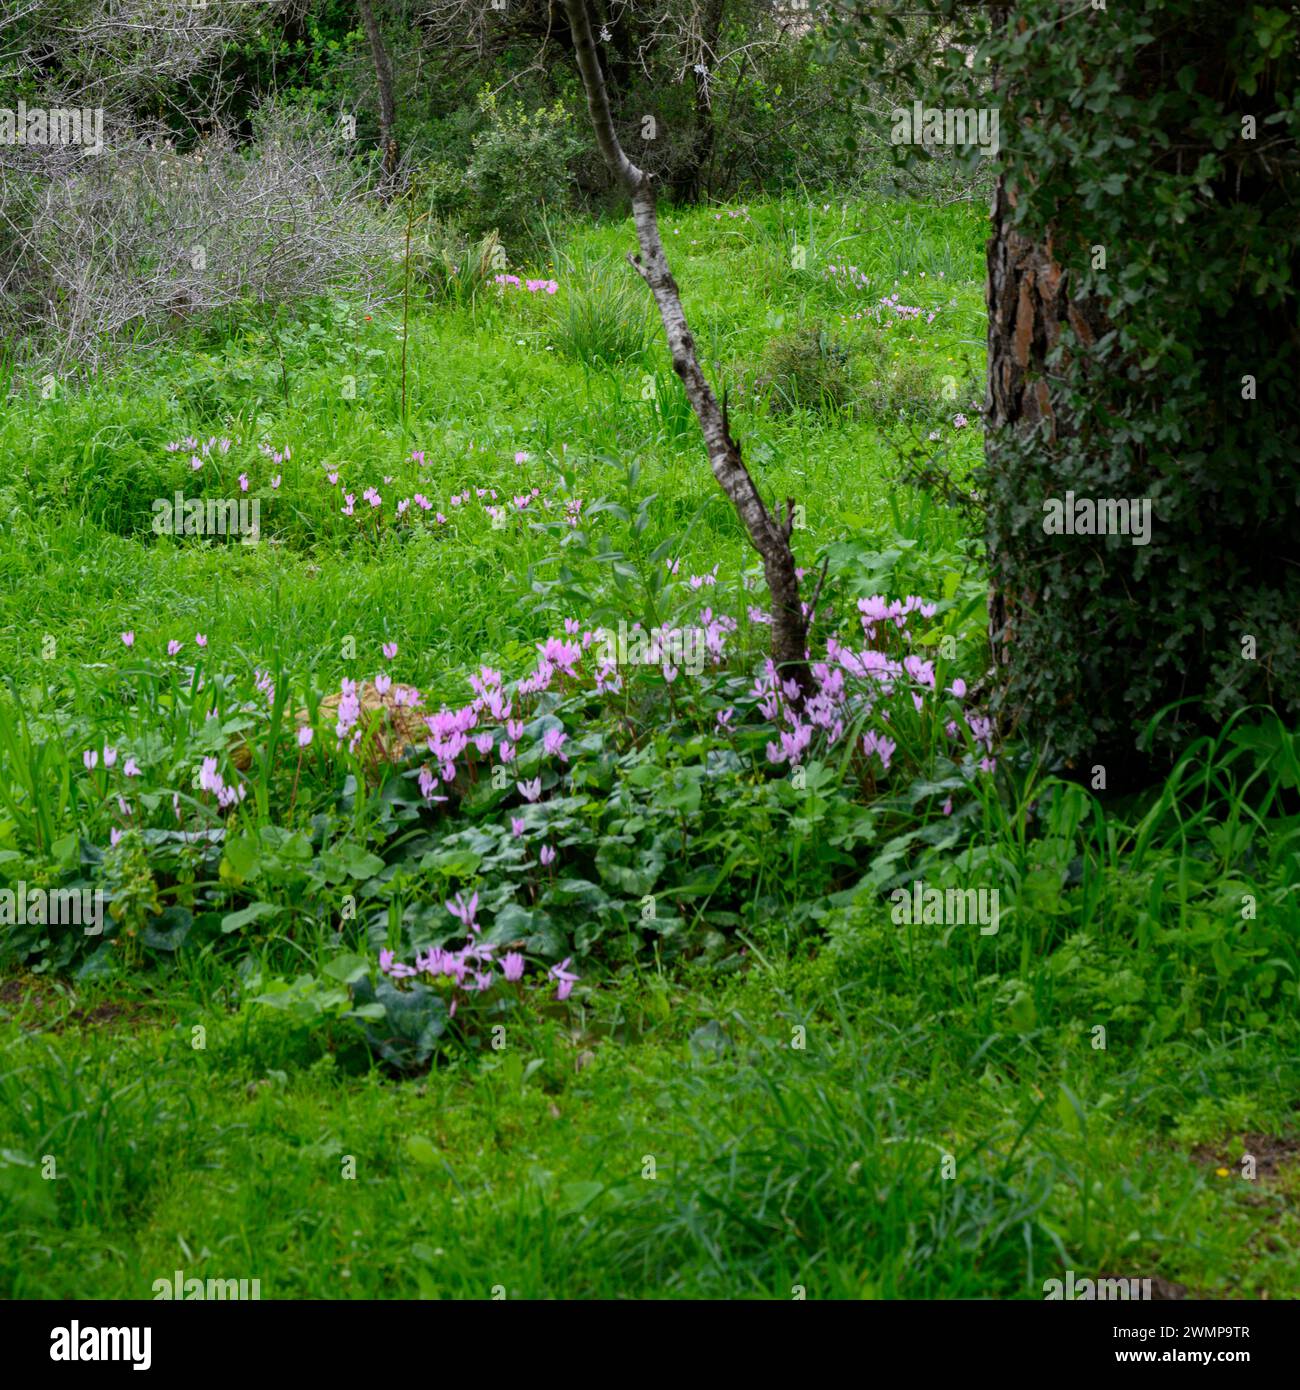 Flowering spring meadow, in a pine tree forest with lush green foliage and an assortment of wildflowers Photographed in the Jerusalem Hills Stock Photo